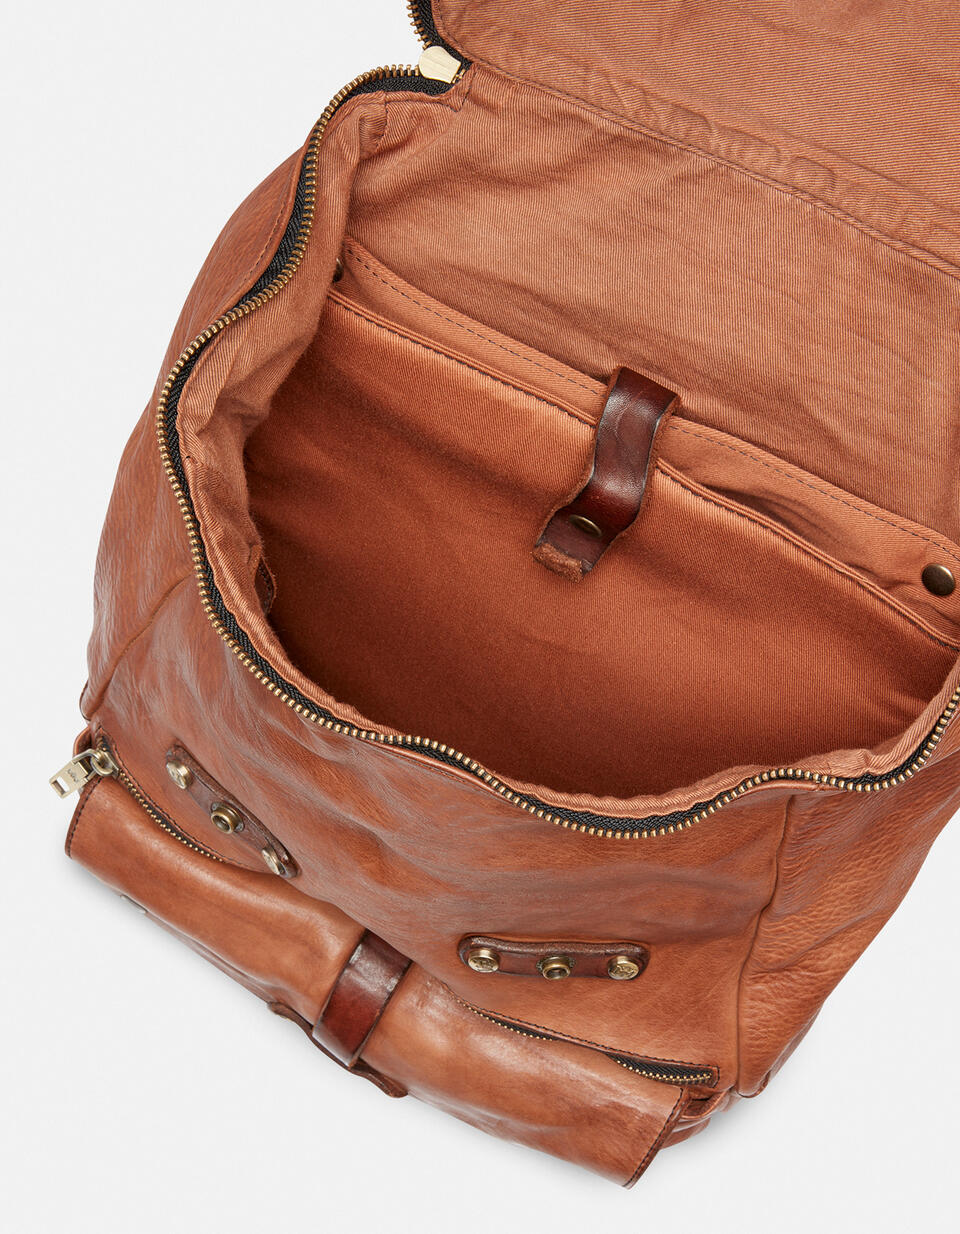 Small Millennial backpack in natural leather - Backpacks - MEN'S BAGS | bags BRUCIATO - Backpacks - MEN'S BAGS | bagsCuoieria Fiorentina